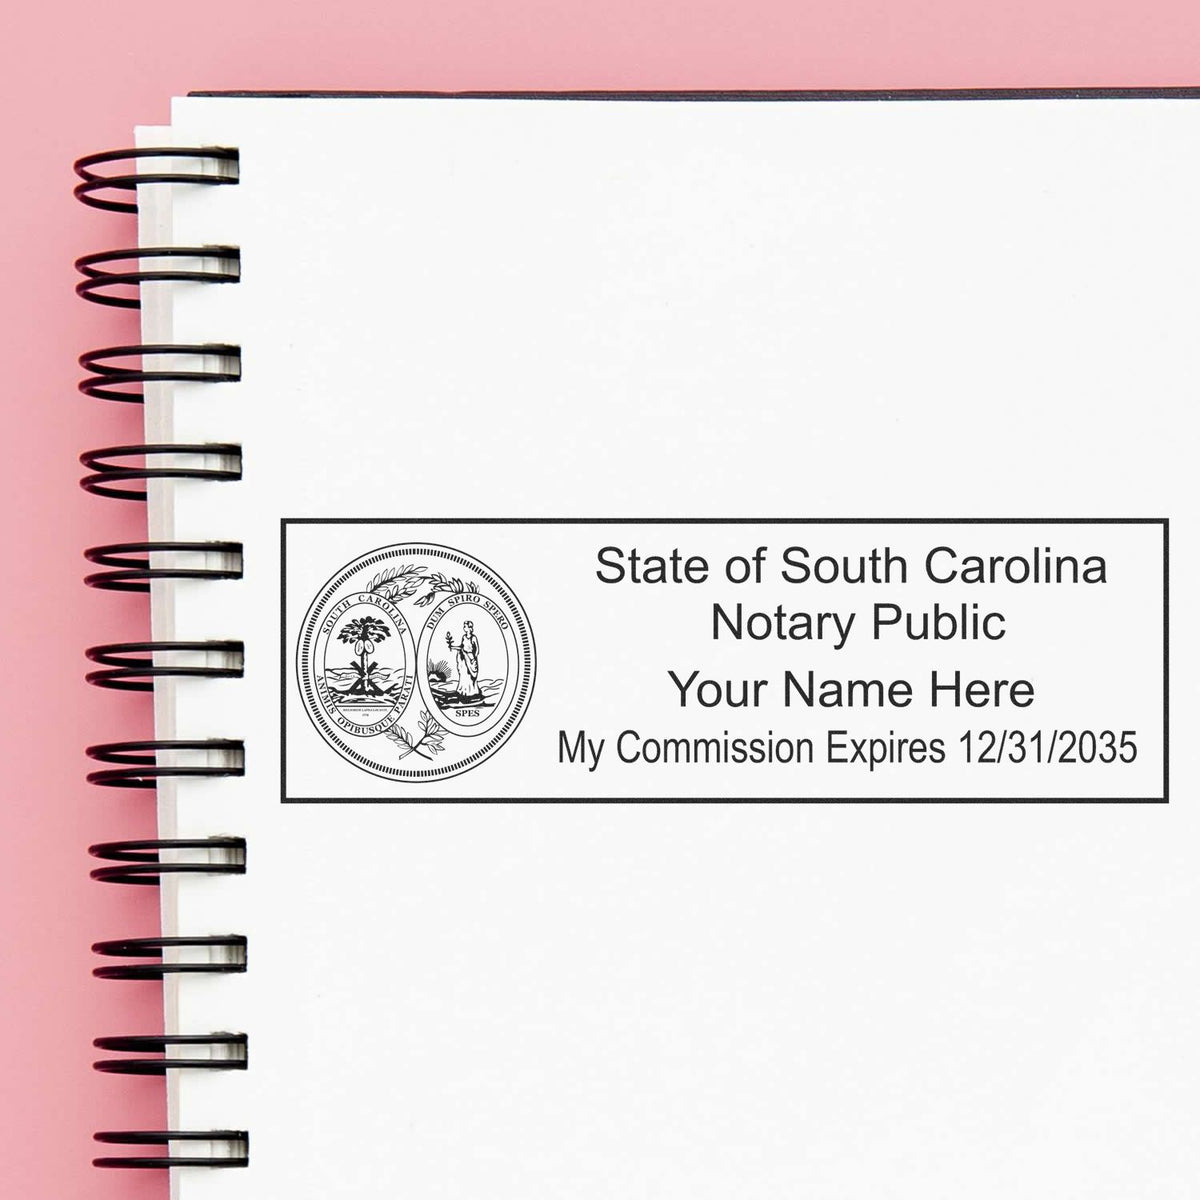 A lifestyle photo showing a stamped image of the Heavy-Duty South Carolina Rectangular Notary Stamp on a piece of paper